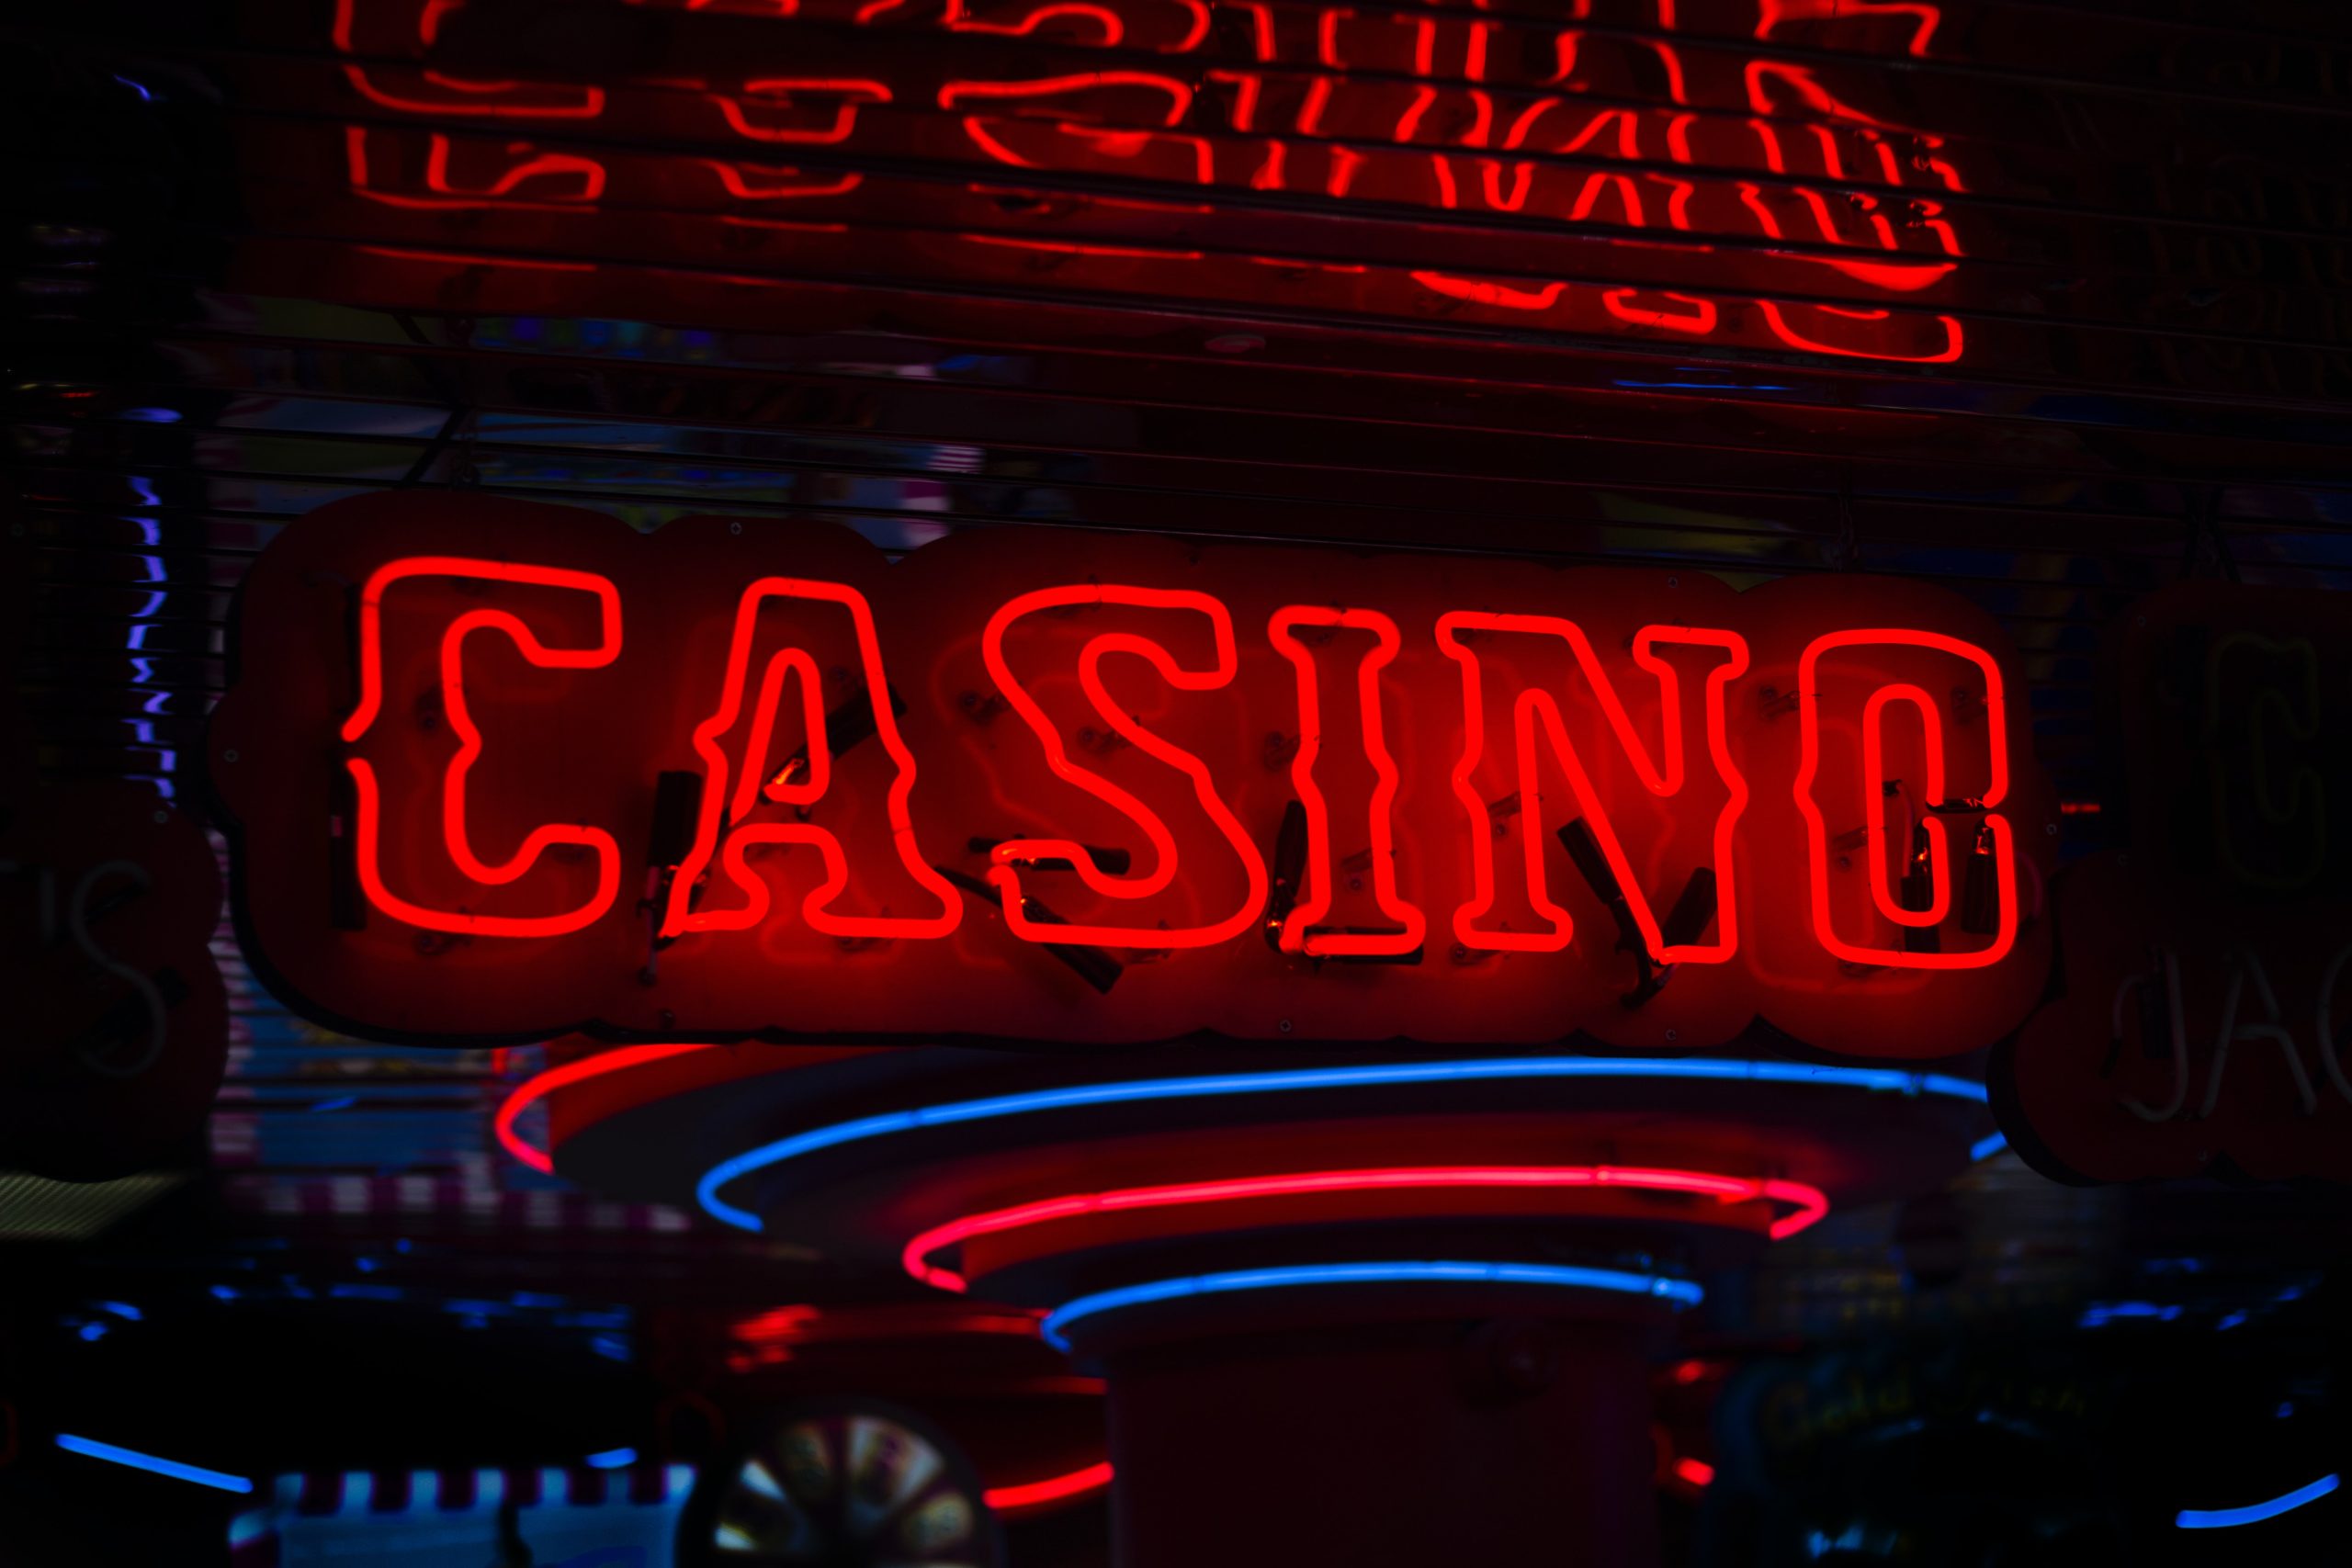 What Games at the Casino are Fully Based on your Luck?